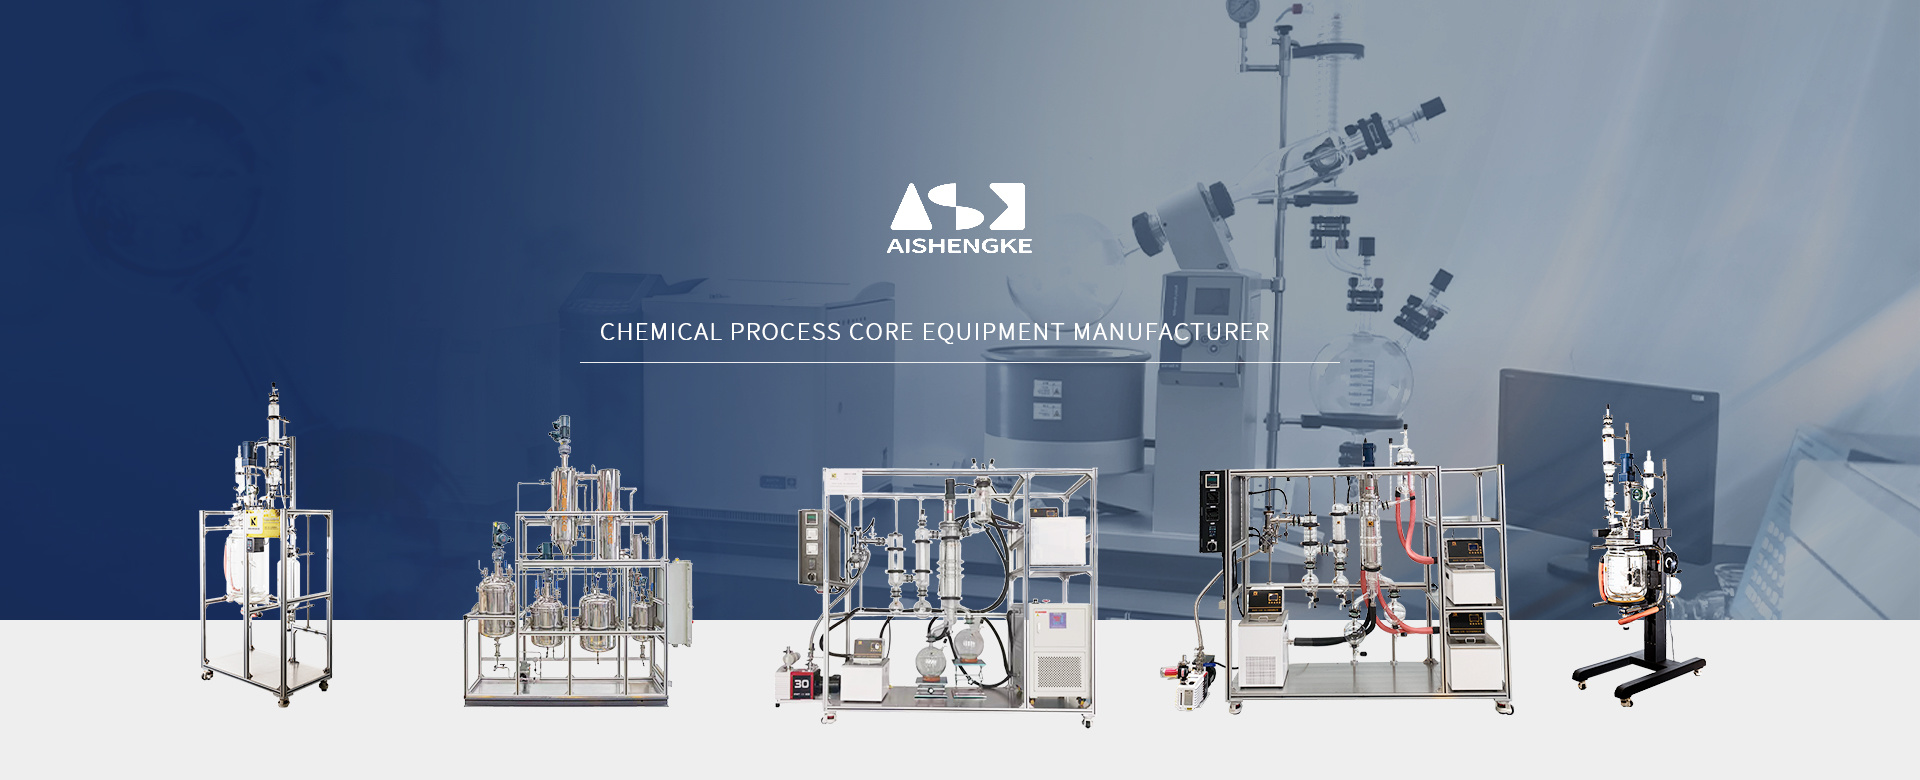 CHEMICAL PROCESS CORE EQUIPMENT MANUFACTURER